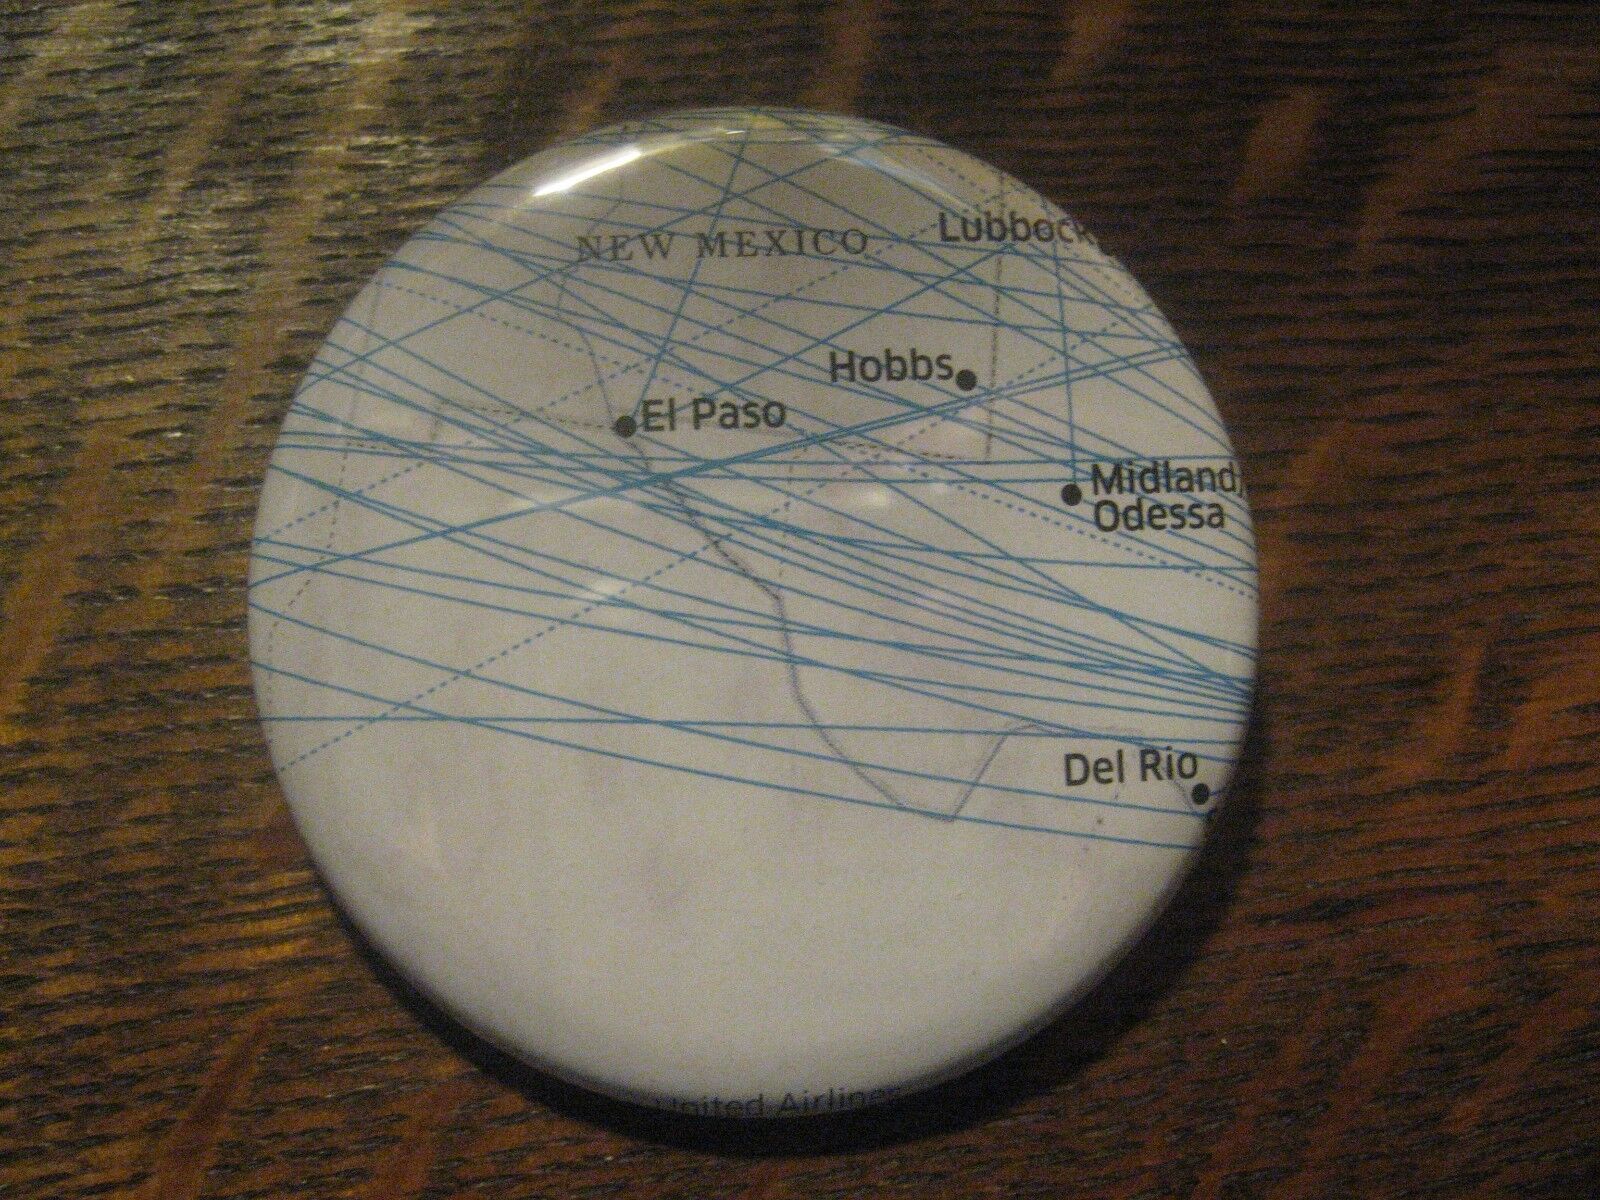 United Airlines UAL Texas Southern USA El Paso Lubbock Route Map Pocket Mirror